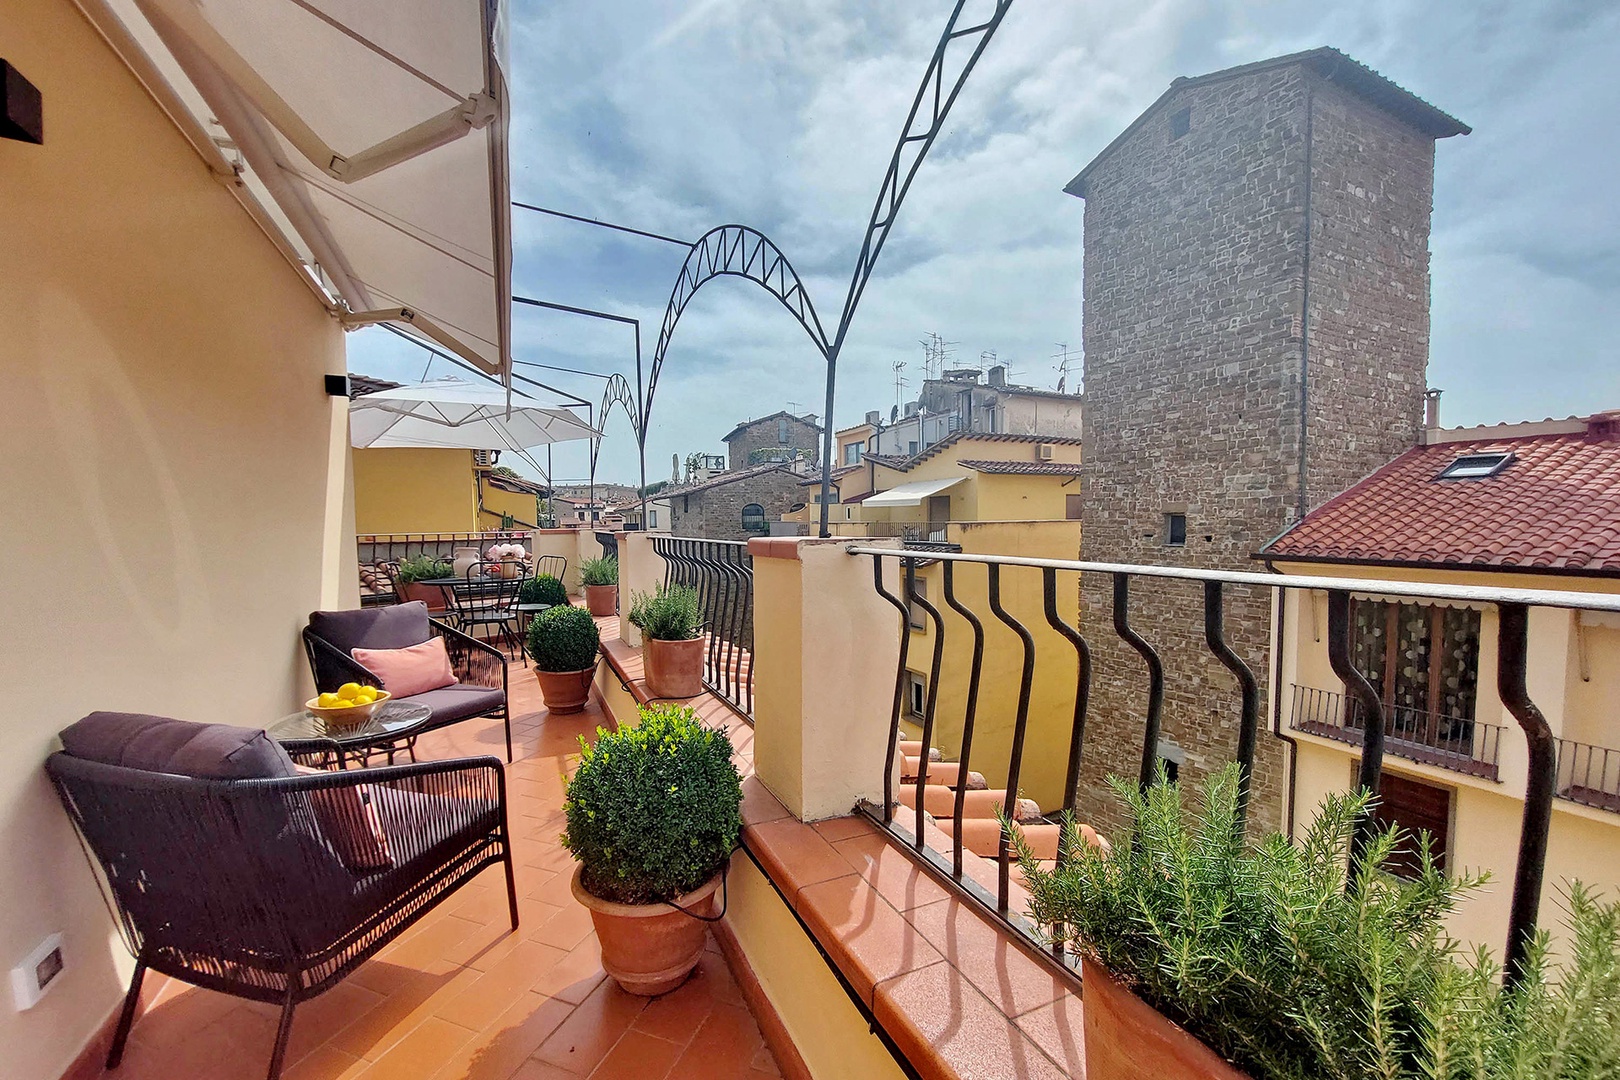 Enjoy quiet moments at home on the spacious balcony.